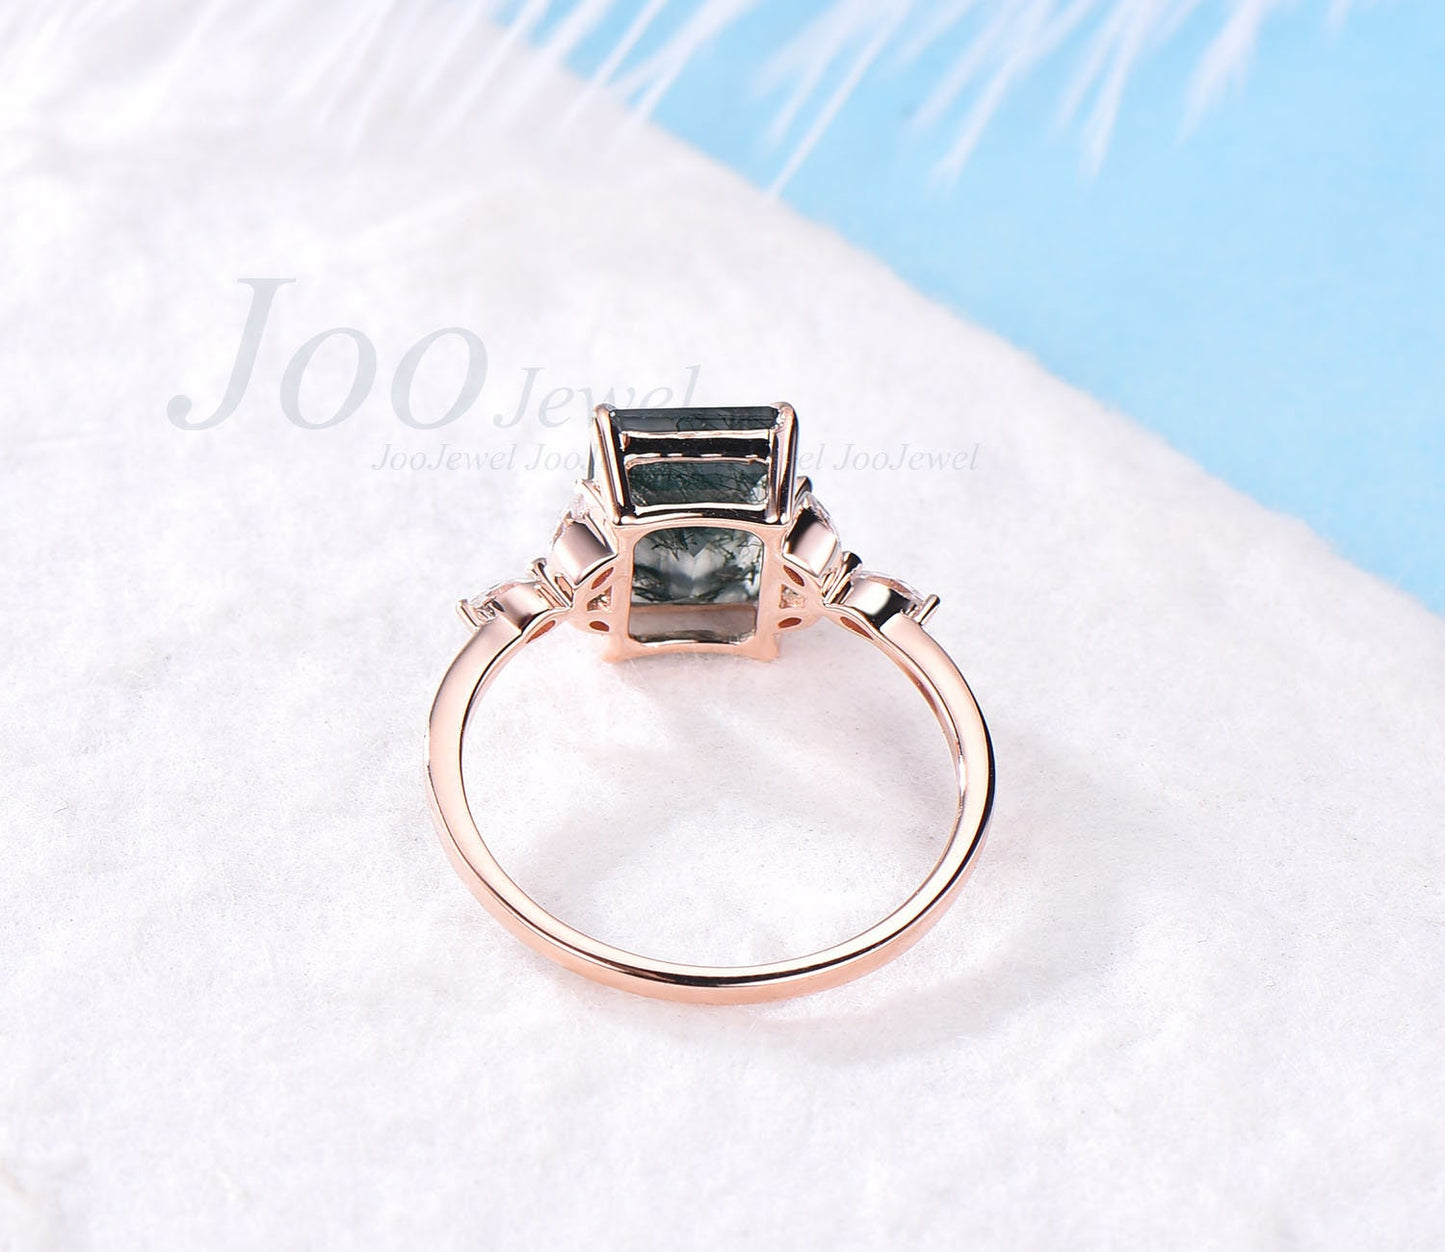 Green moss agate ring unique vintage 7x9mm emerald cut moss agate engagement ring art deco flower marquise moissanite ring rose gold silver